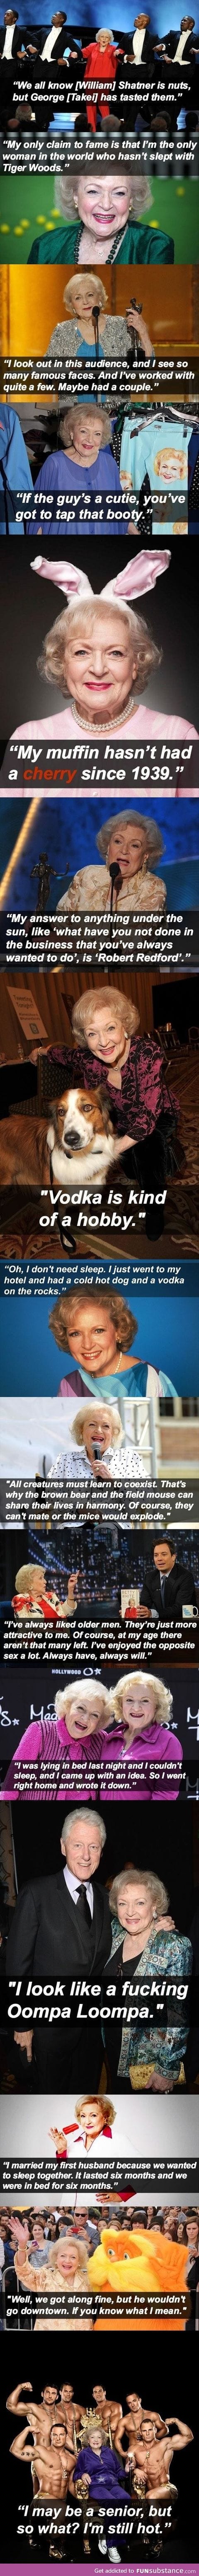 Why betty white is awesome